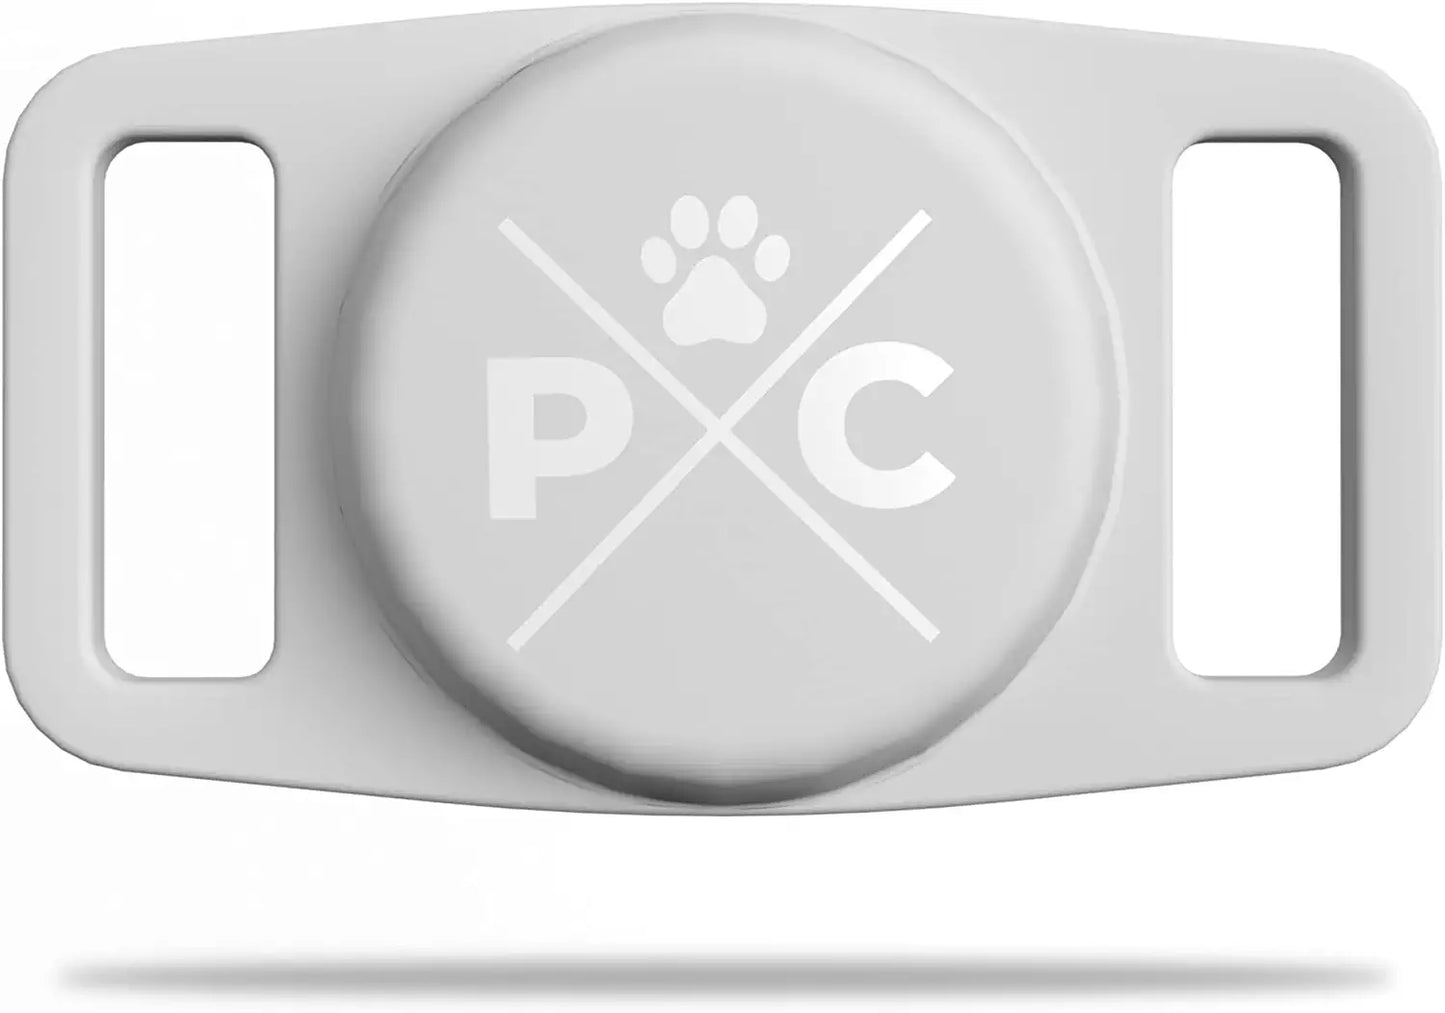 Pup Culture Airtag Dog Collar Holder, Protective Airtag Case for Dog Collar, Airtag Loop for GPS Dog Tracker, Dog Trackers for Apple Iphone, Airtag Pet, Dog Airtag Holder Electronics > GPS Accessories > GPS Cases Pup Culture Gray 1 Pack 